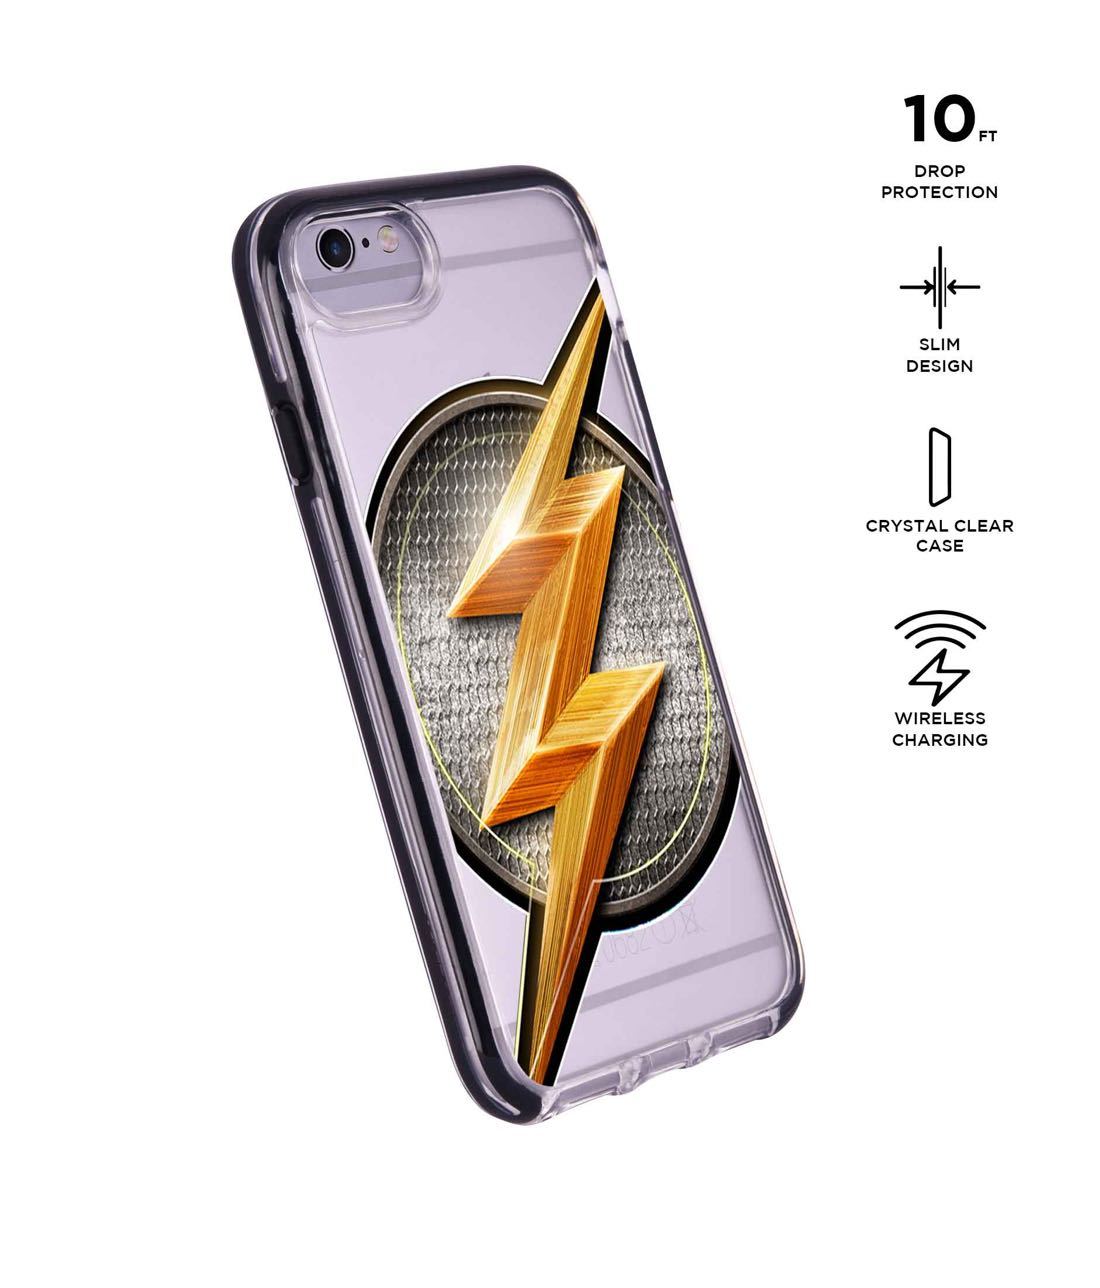 Flash Storm - Extreme Phone Case for iPhone 6S Plus